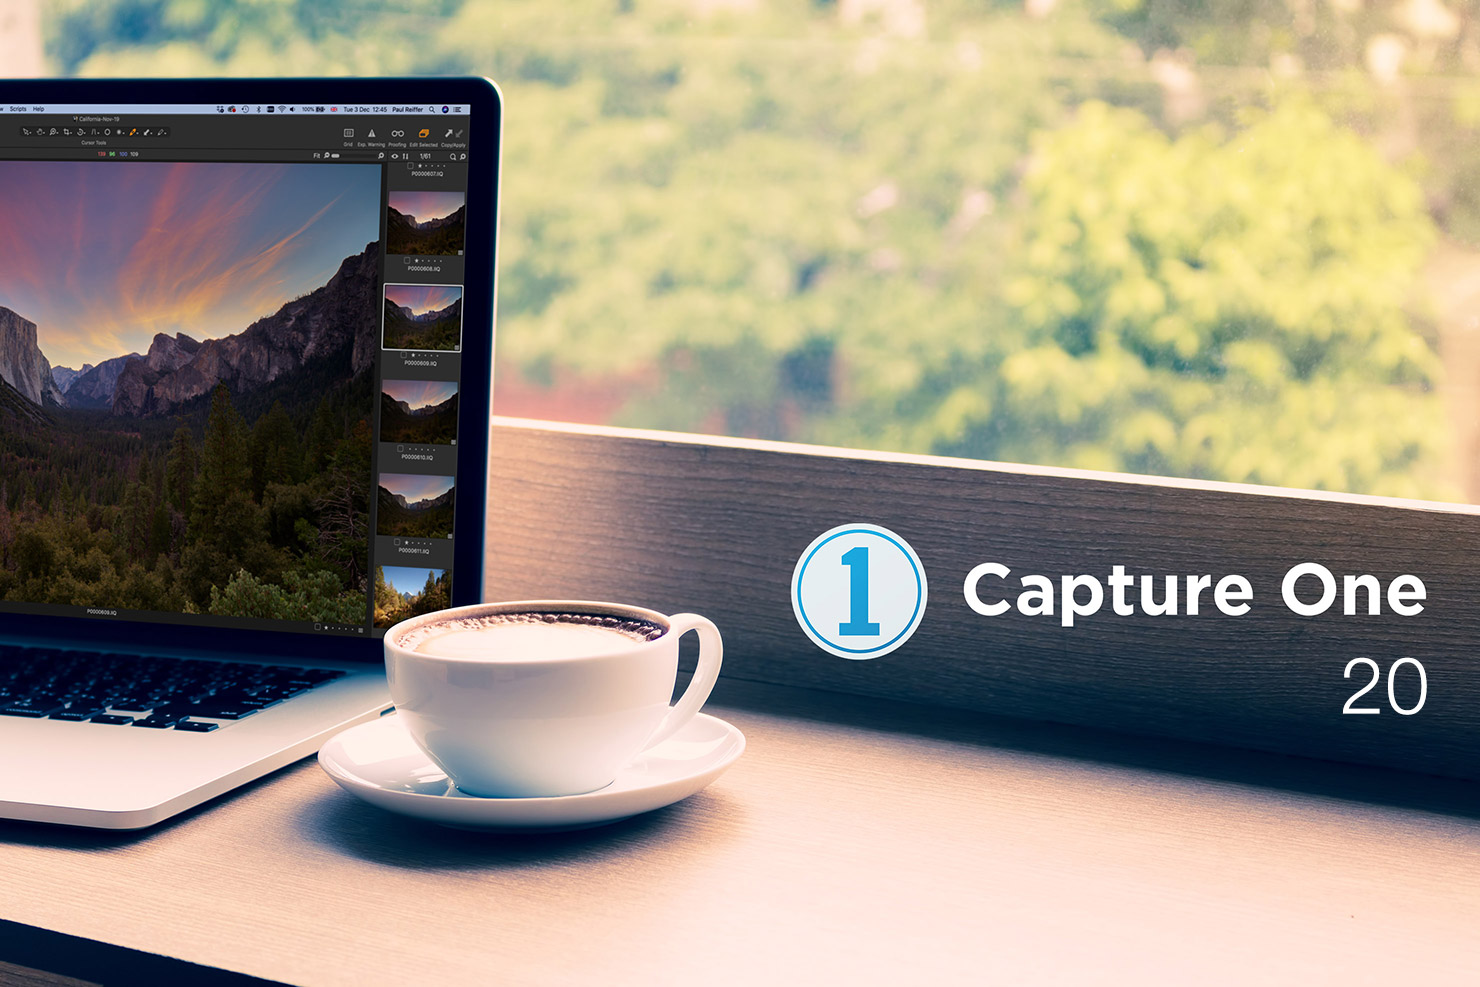 Capture One 20 Launch Paul Reiffer Coffee Shop Yosemite Valley Features Review New Version Phase One v20 Upgrade